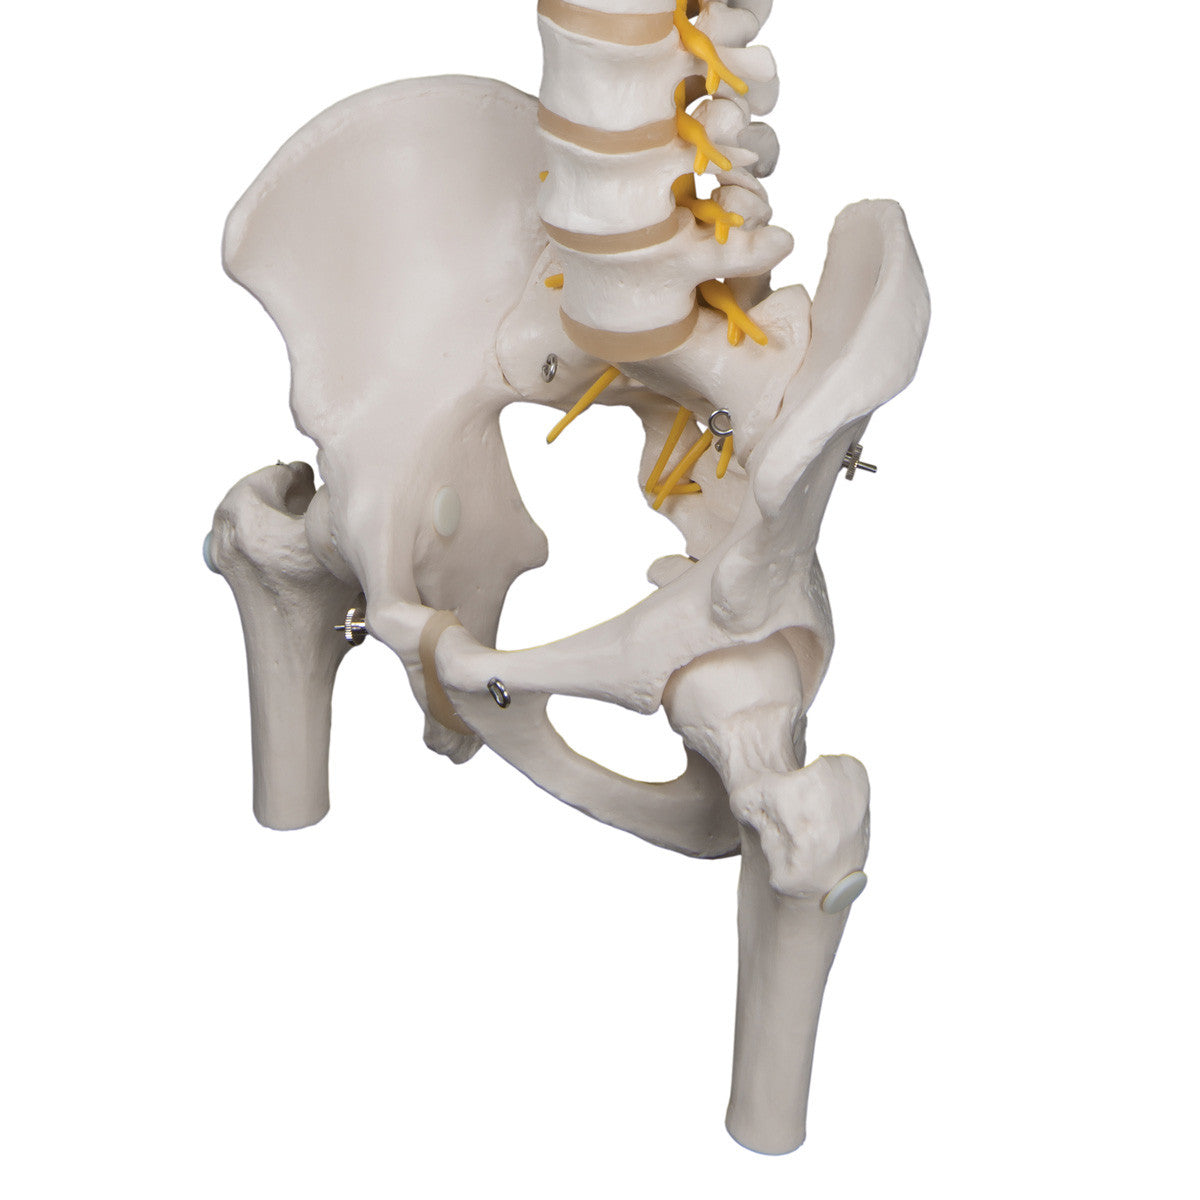 a58-6_06_1200_1200_deluxe-flexible-human-spine-model-with-femur-heads-sacral-opening-3b-smart-anatomy__87972.1589753154.1280.1280.jpg